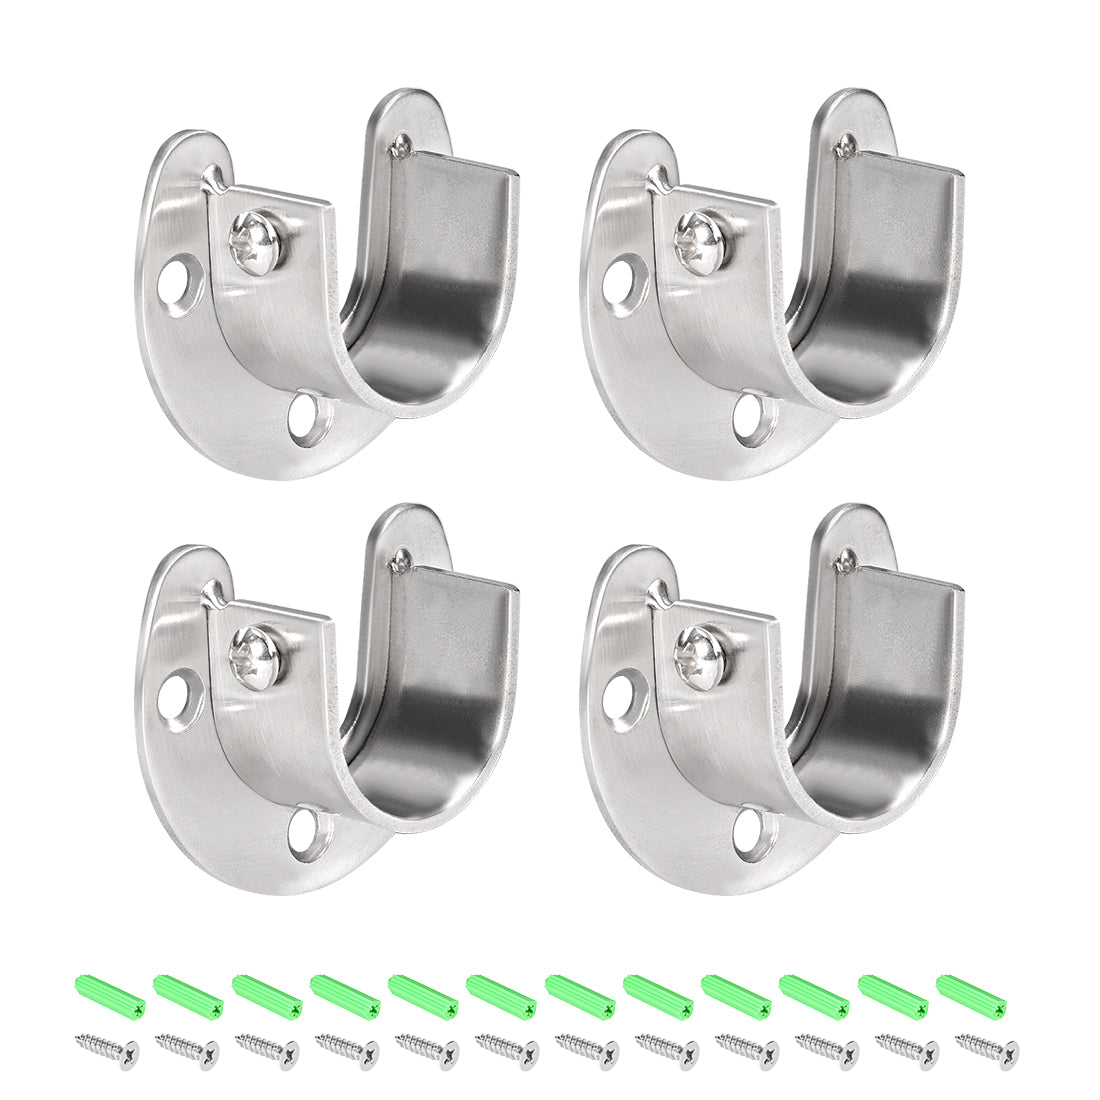 uxcell Uxcell Stainless Steel Closet Rod End Supports, Wardrobe Pole Sockets Flange Rod Holder w Screws, 32mm Diameter - 4 Packs (U-Shaped)